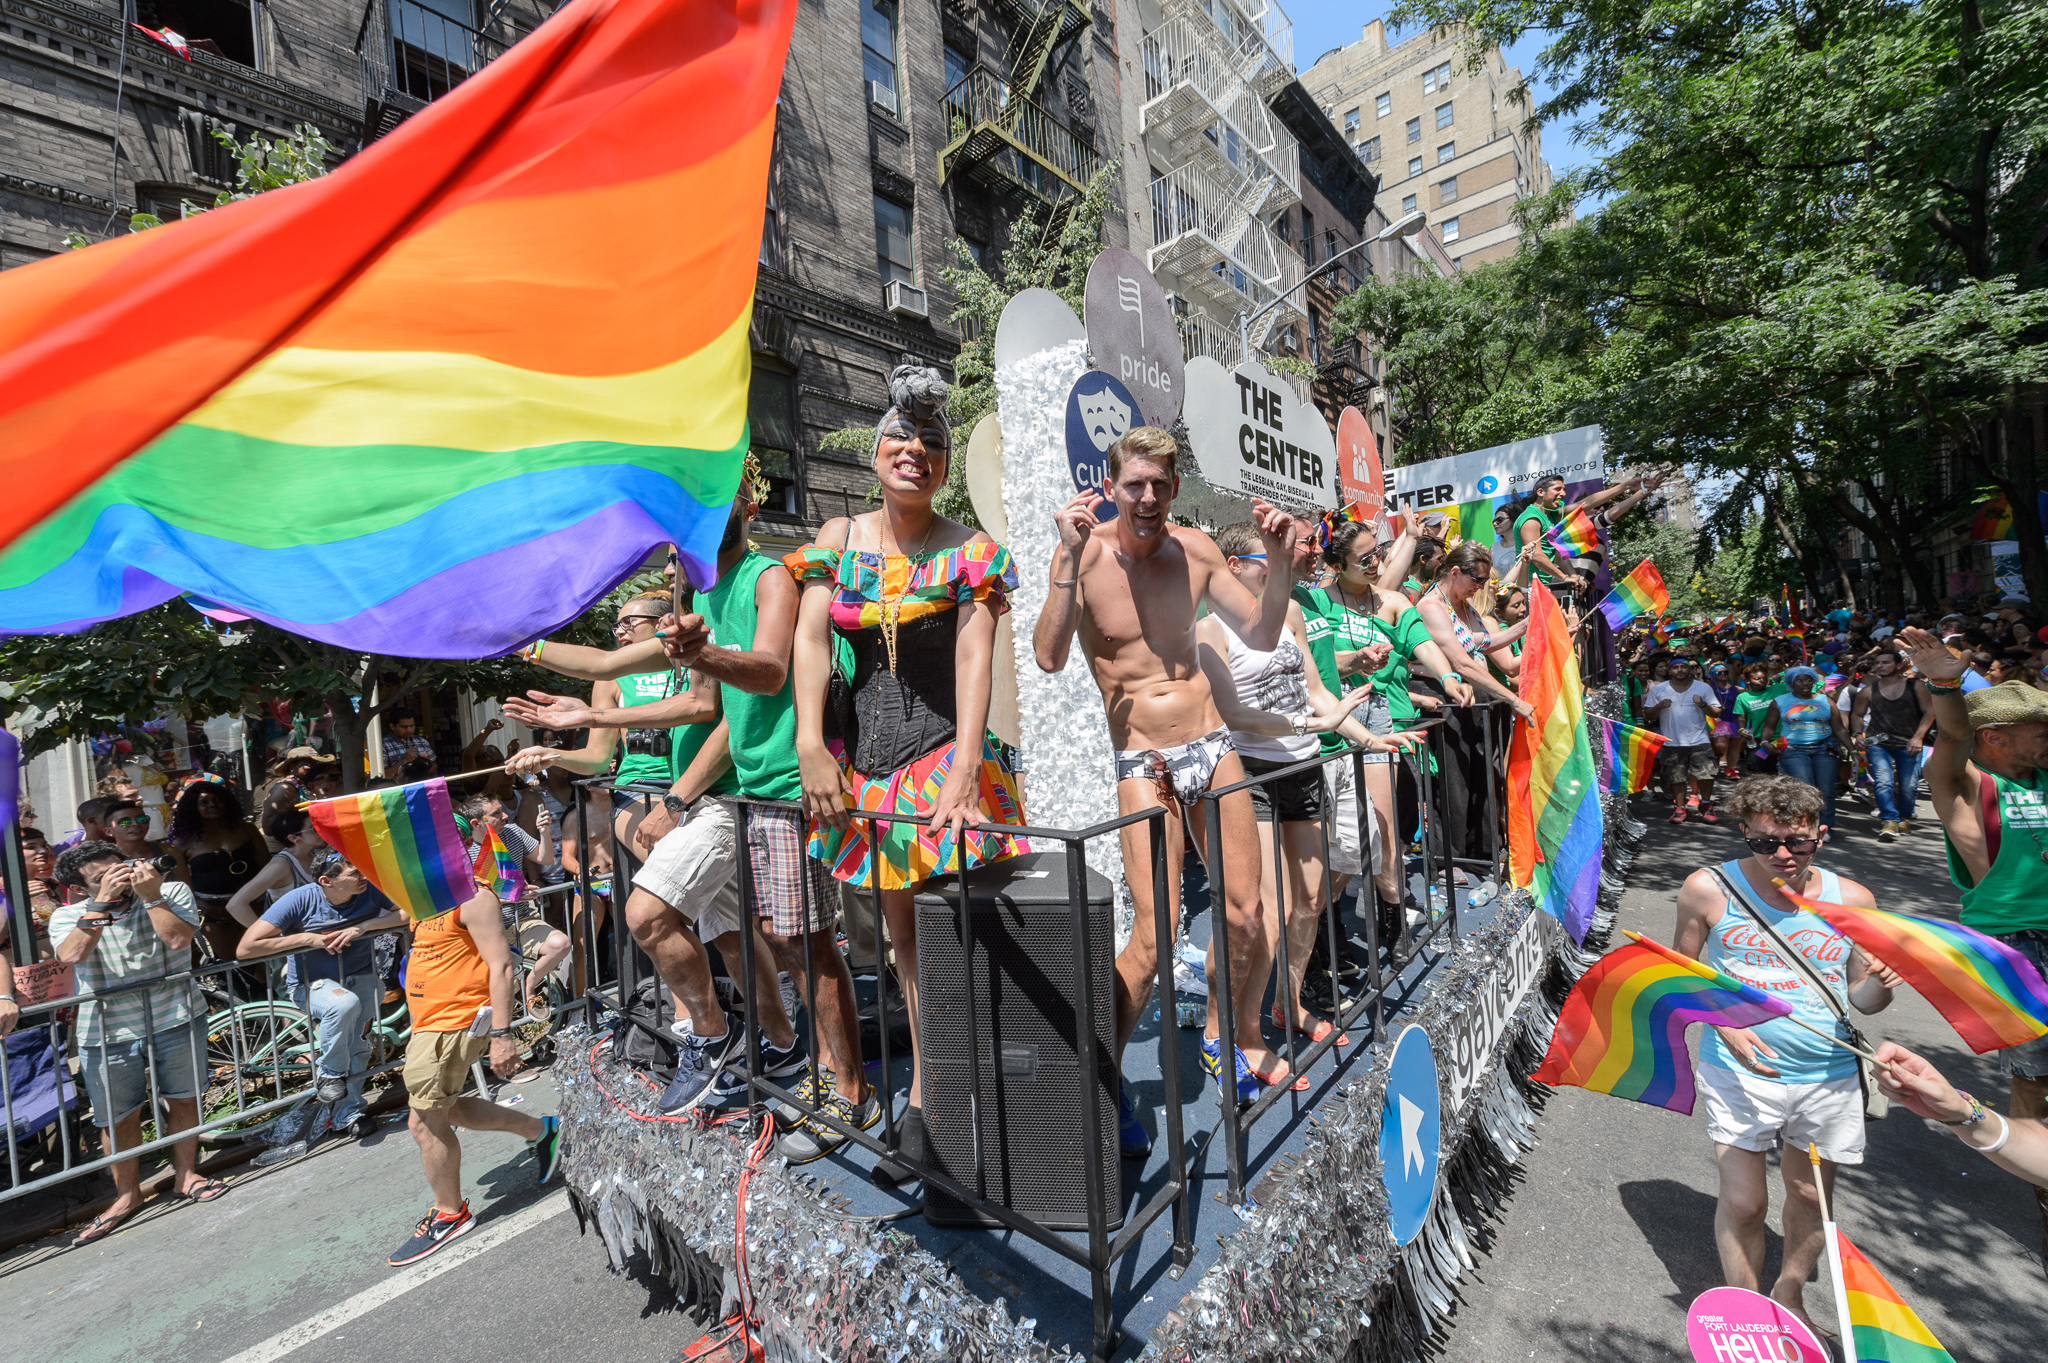 Best gay pride events in America to celebrate LGBT rights